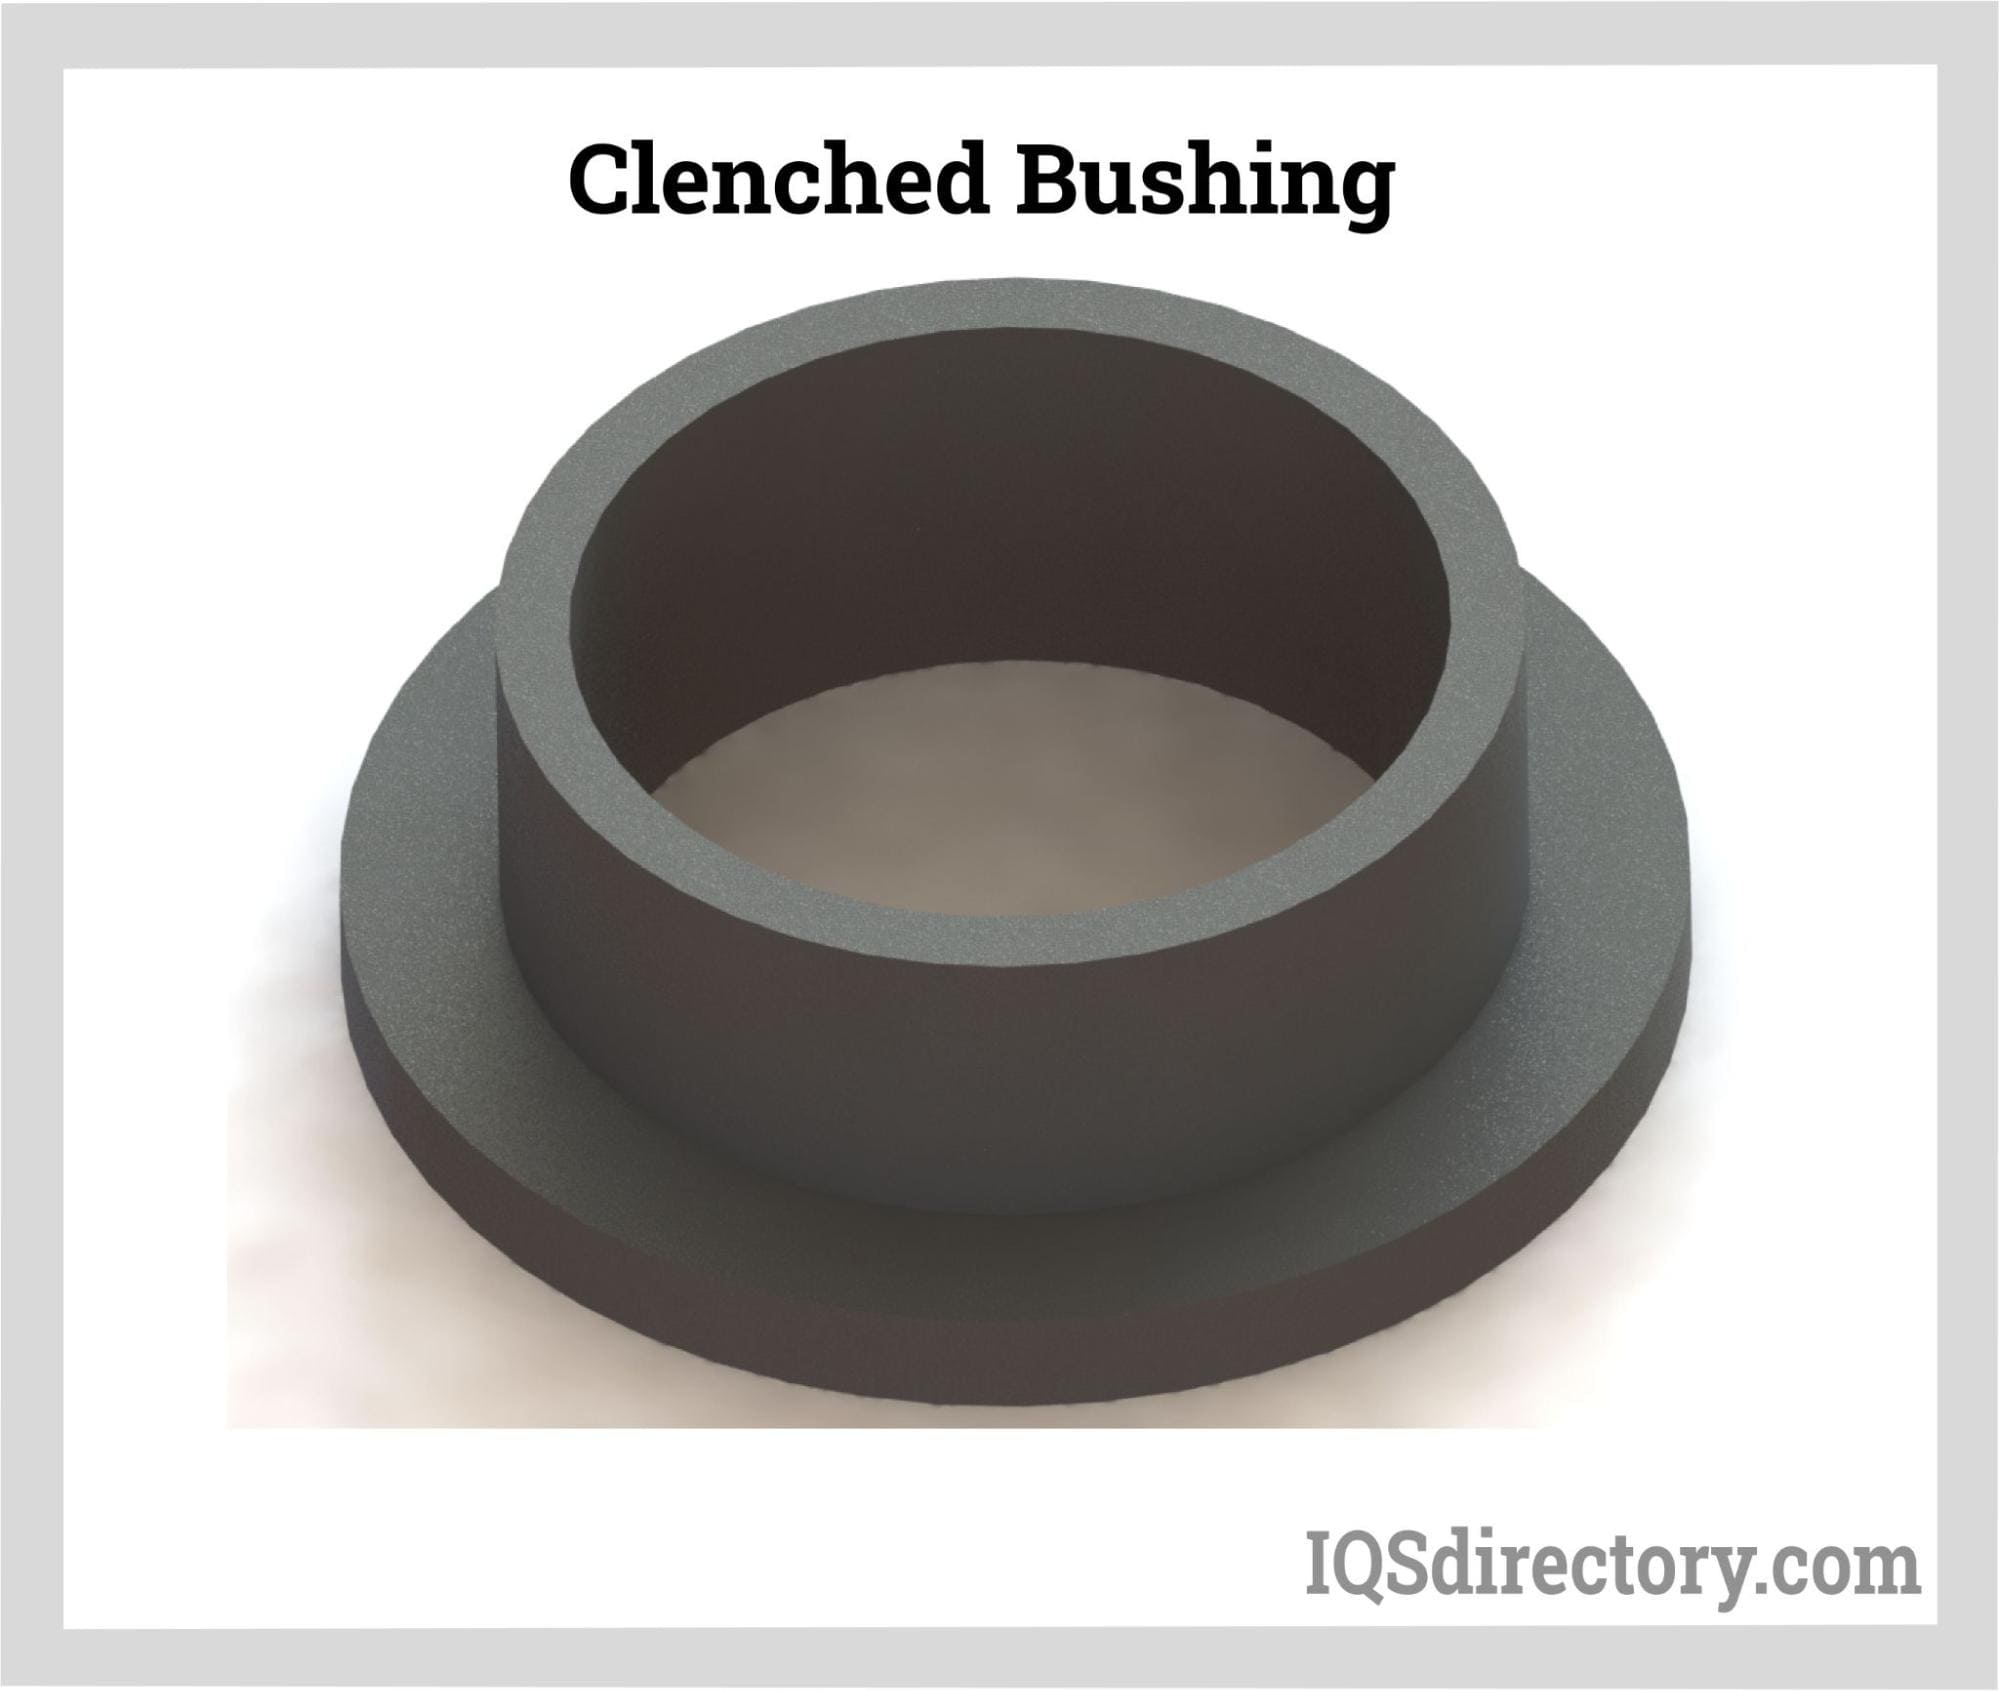 Clenched Bushing